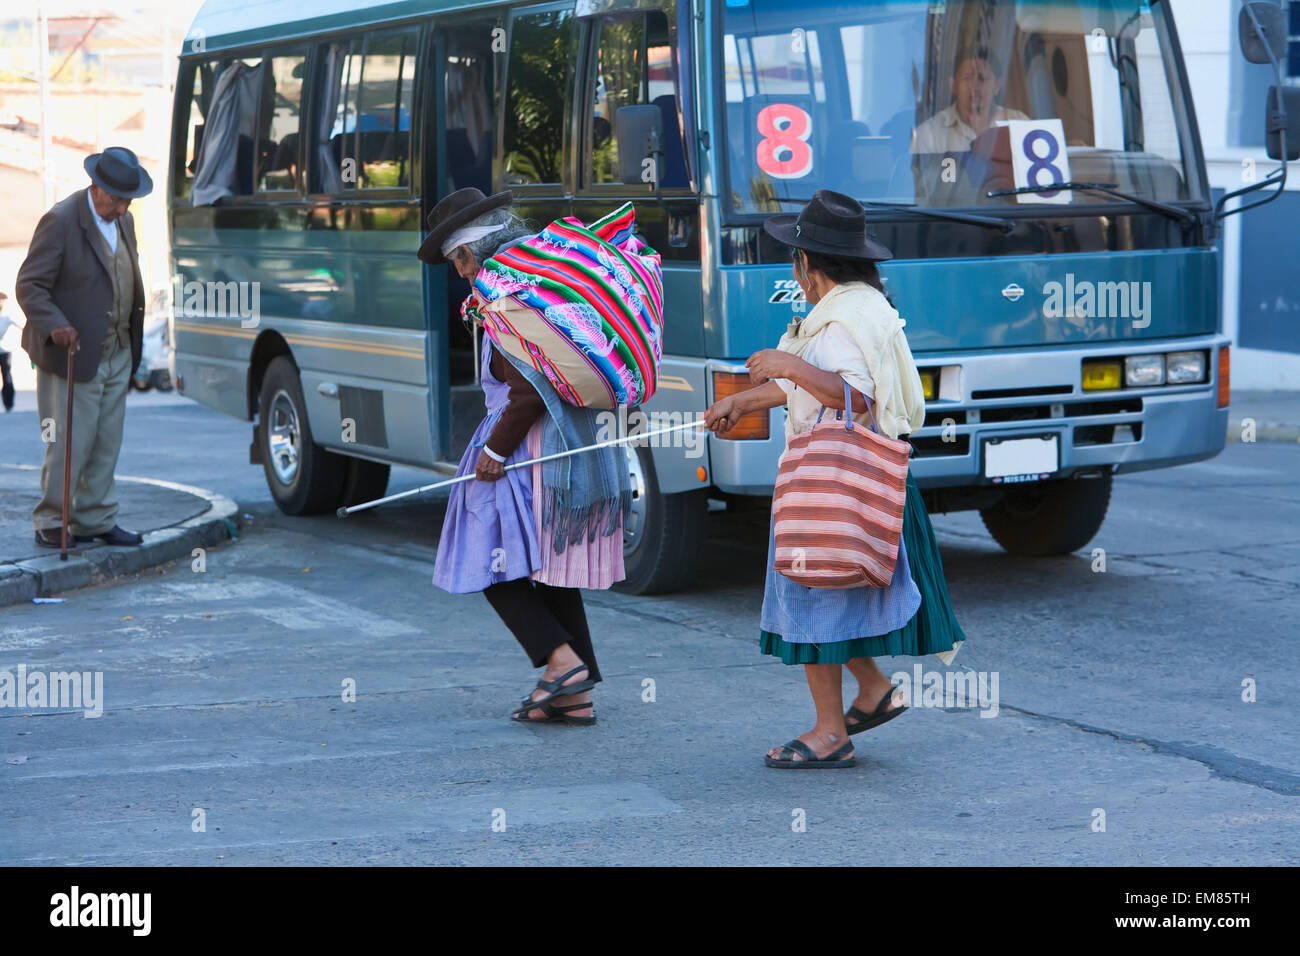 Aymara Woman Helping A Blind Woman To Cross The Street, Cementerio General, Sucre, Chuquisaca Department, Bolivia Stock Photo